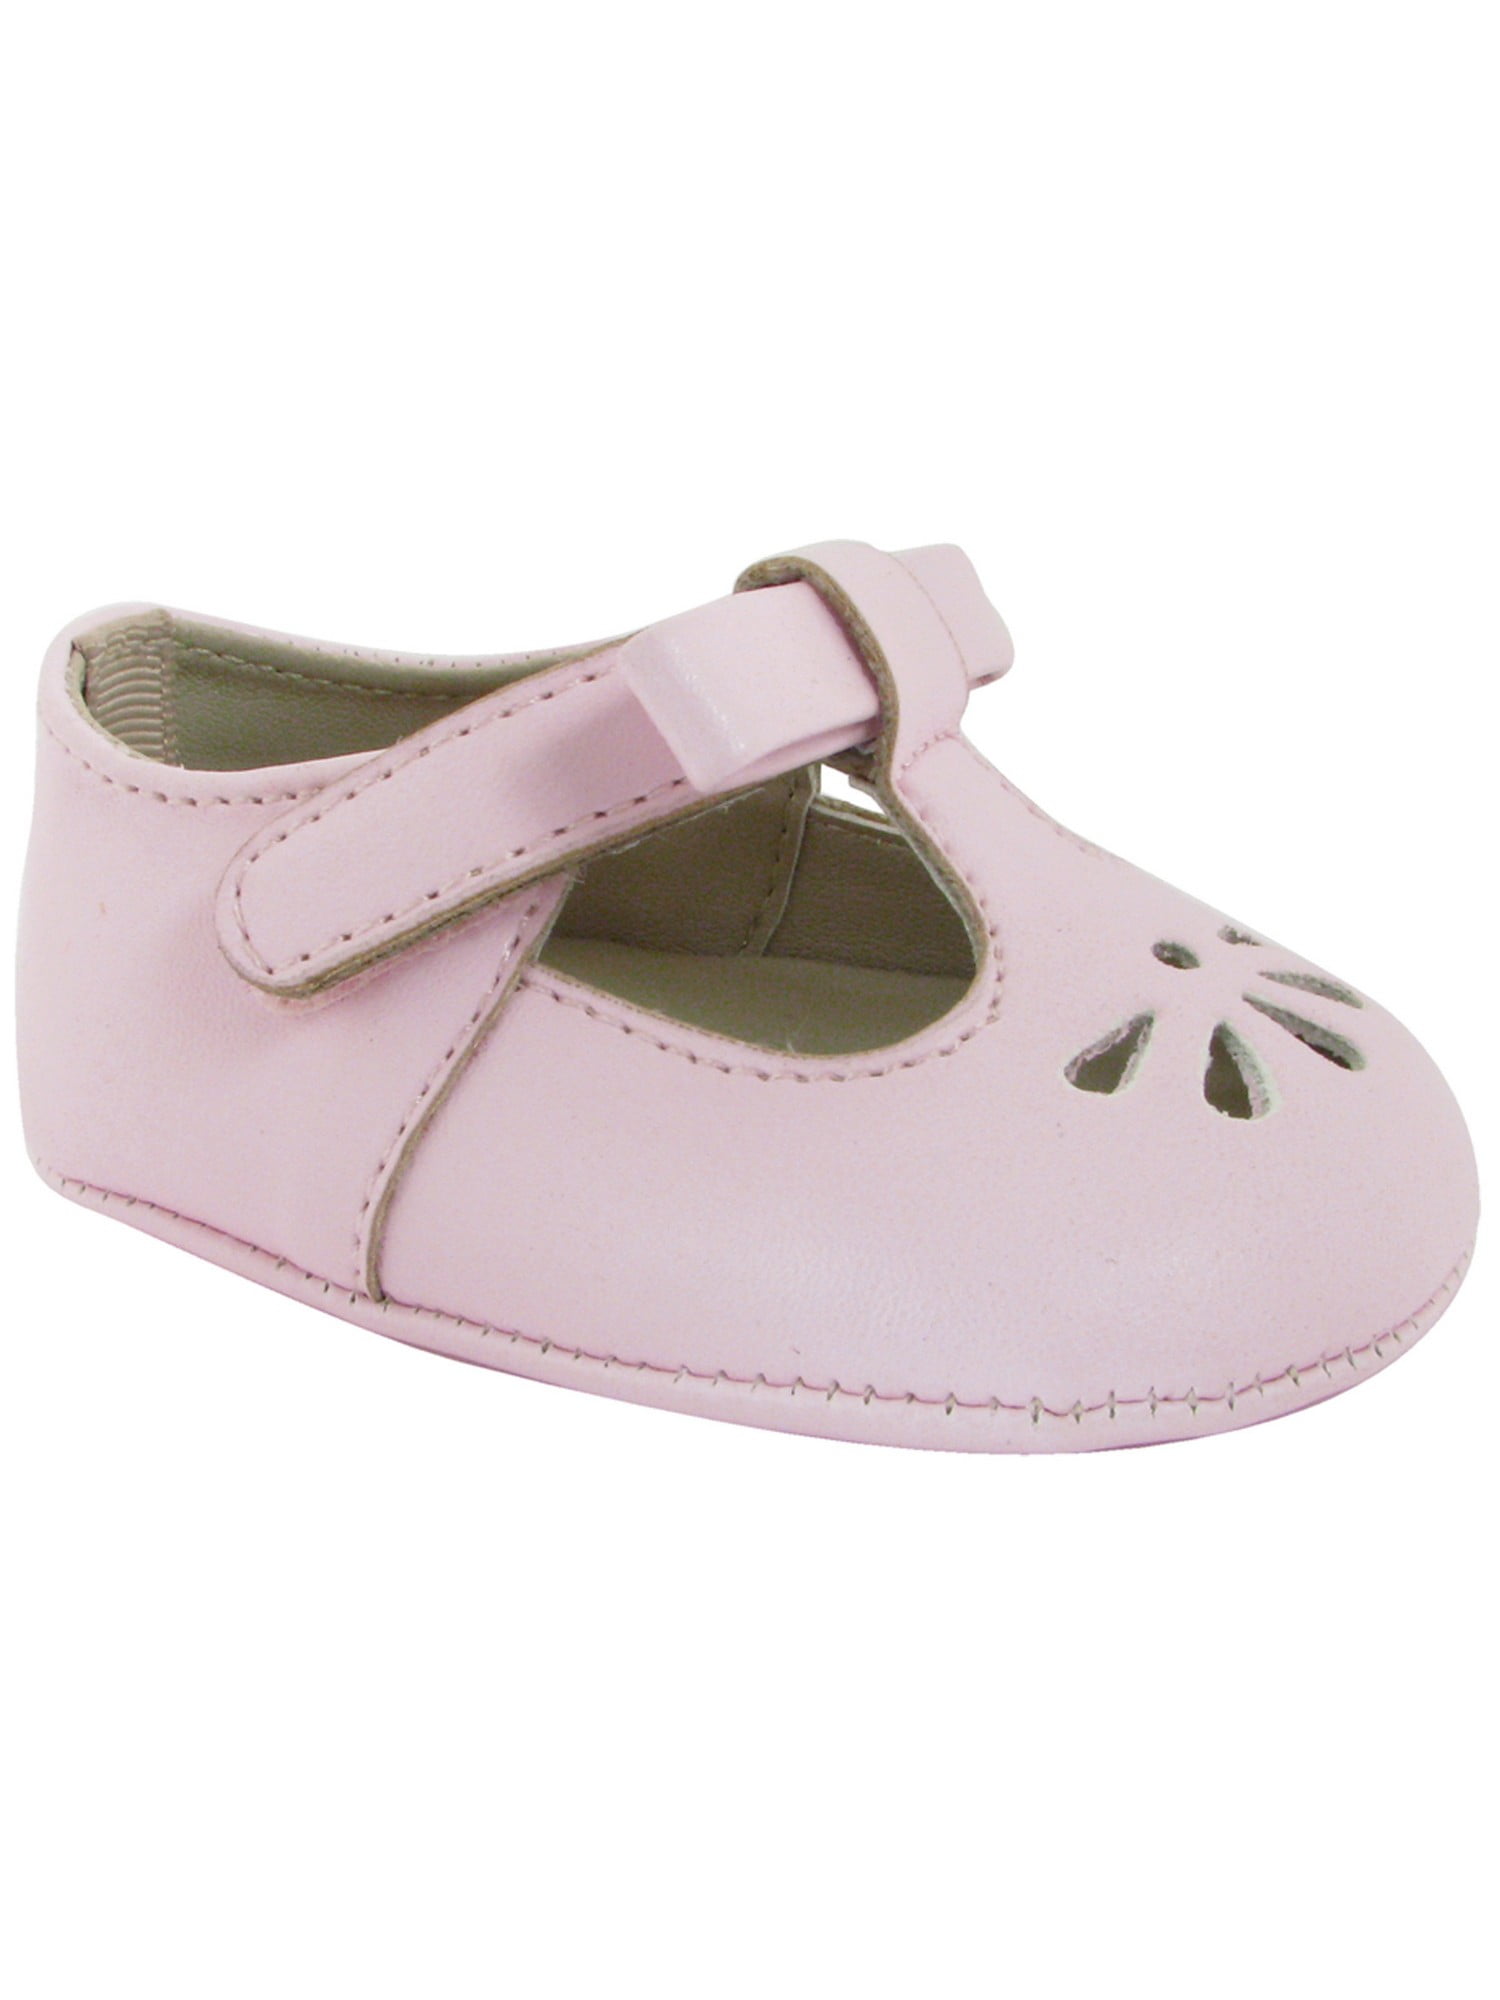 Baby Deer Girls Multi Color Leather 